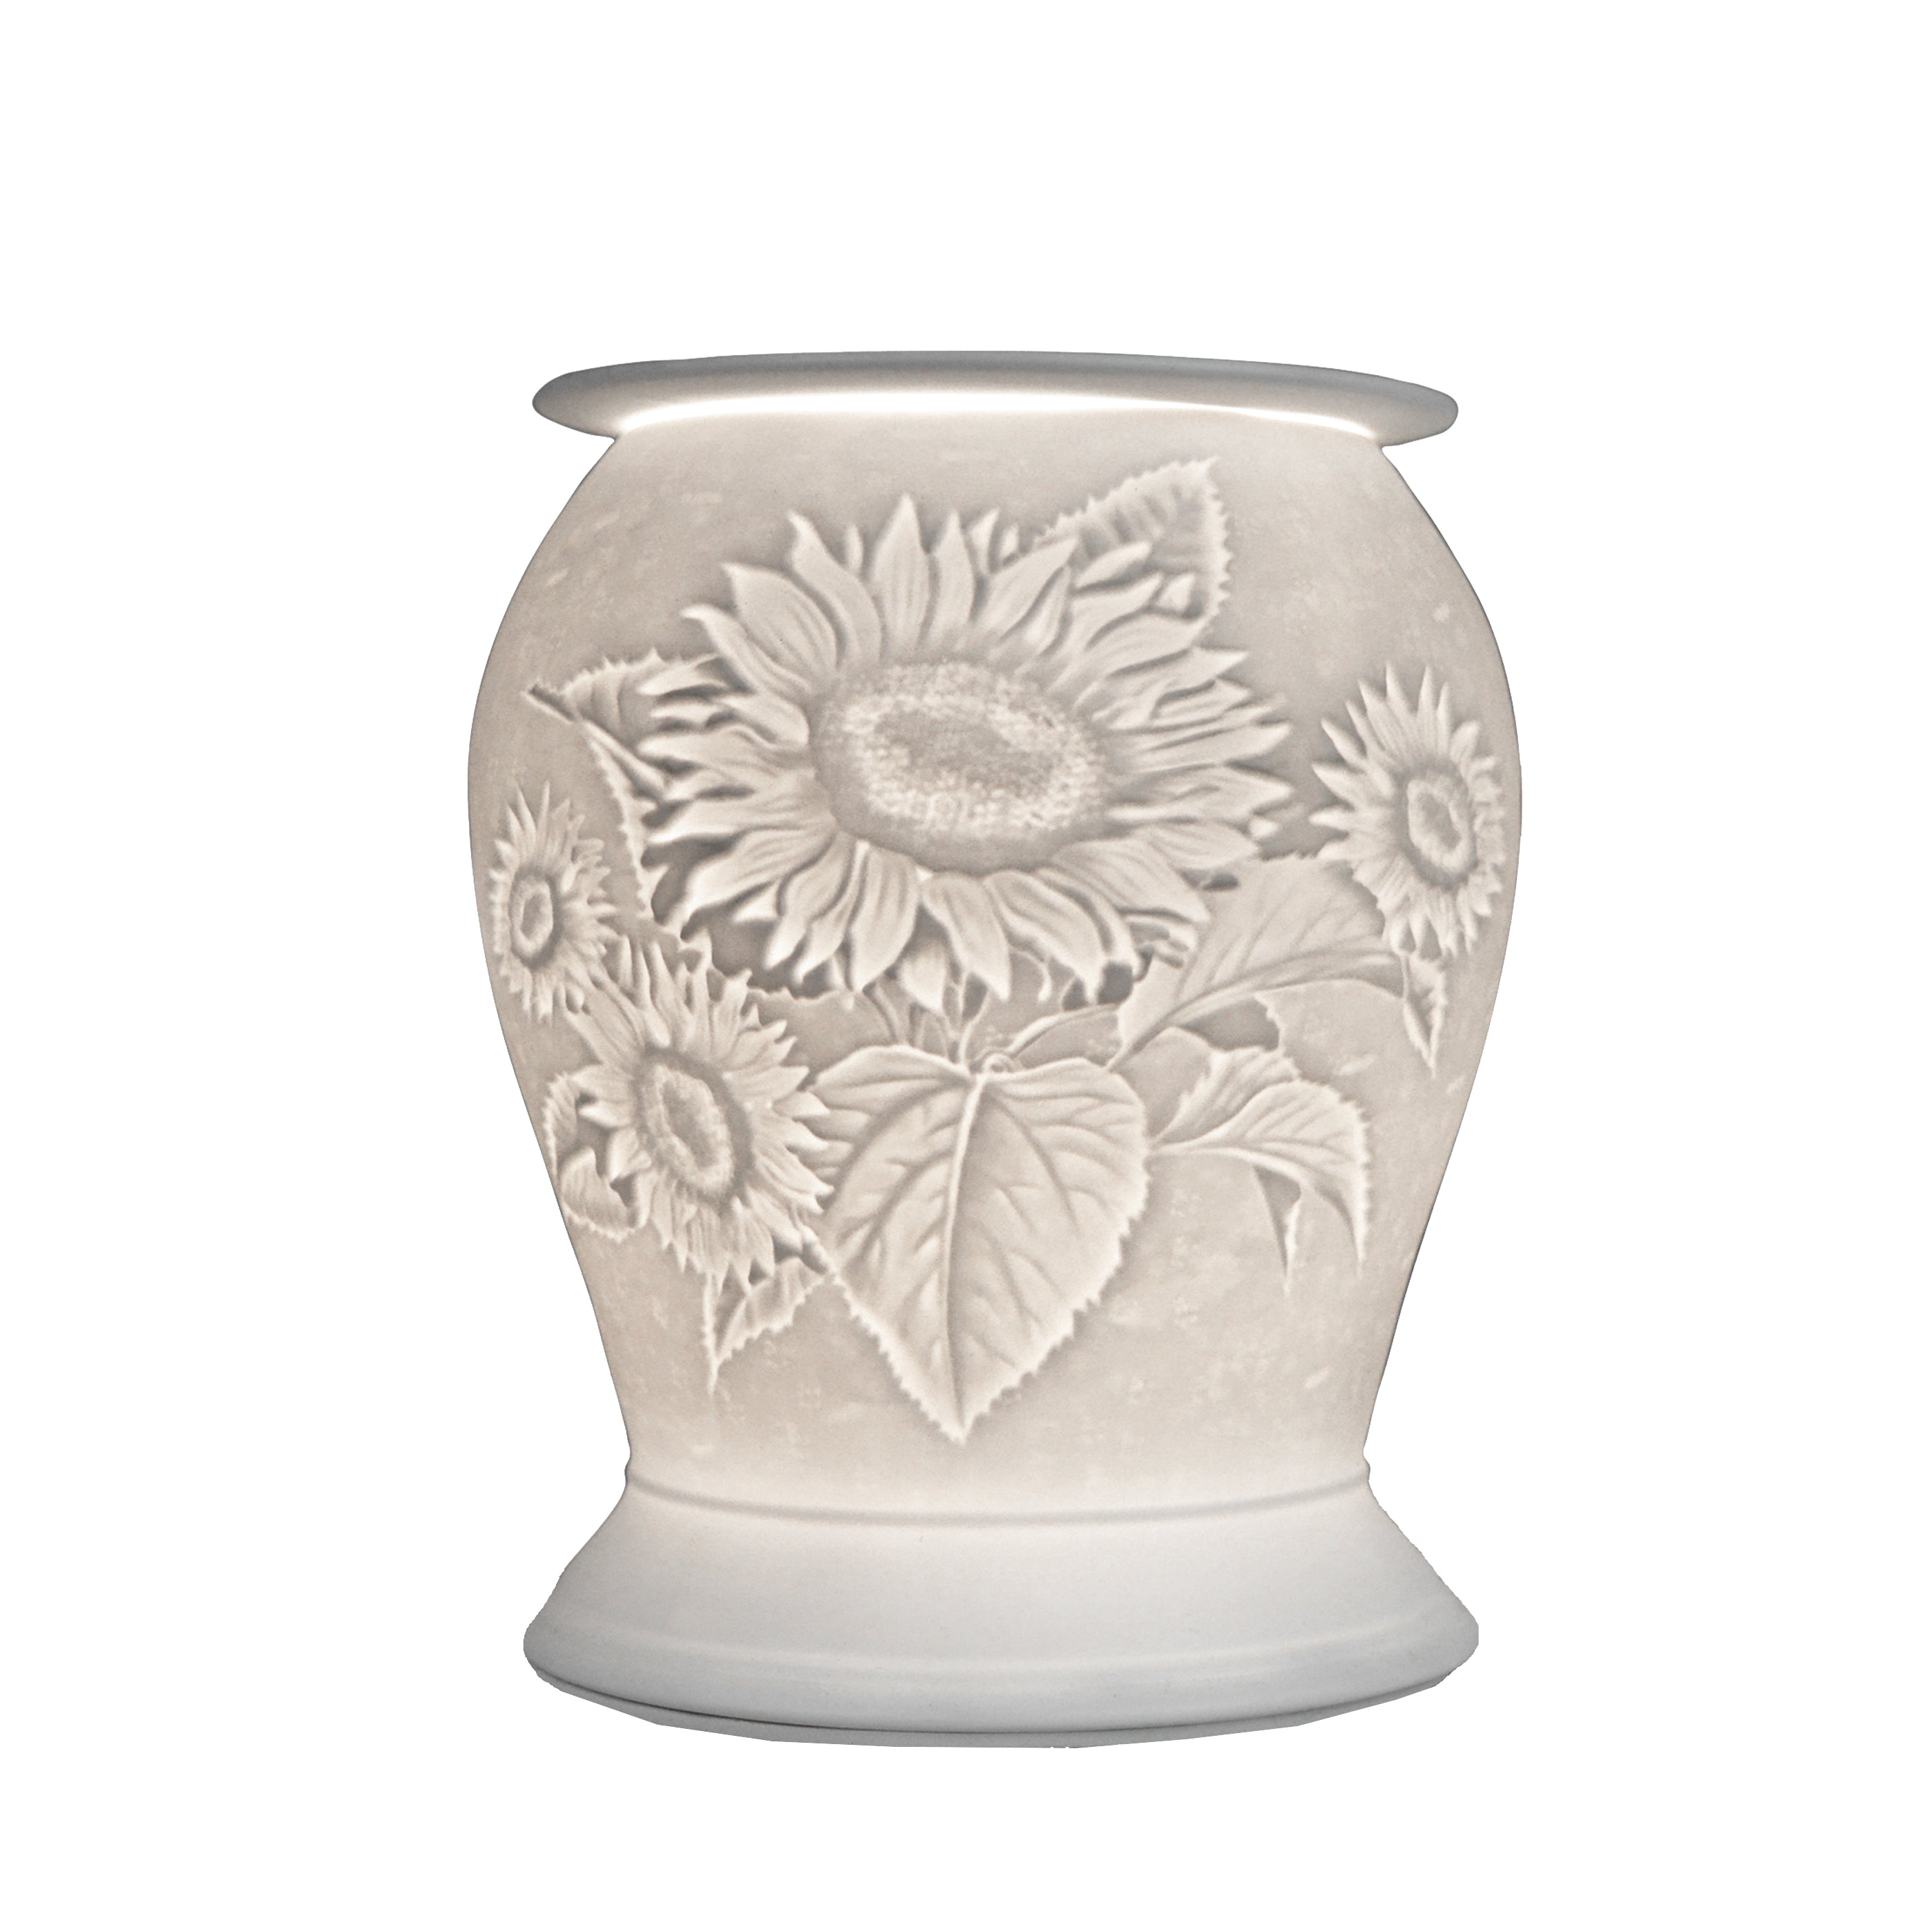 The porcelain material on this Wax Melt Burner allows bright light to shine through it, providing the opportunity to create this gorgeous Summertime design. This is done by crafting images out of thicker and thinner sections of the porcelain, allowing for detailed shadowing and a 3D effect. The porcelains elegant look will fit perfectly in any room is available in a range of designs and two different shapes.